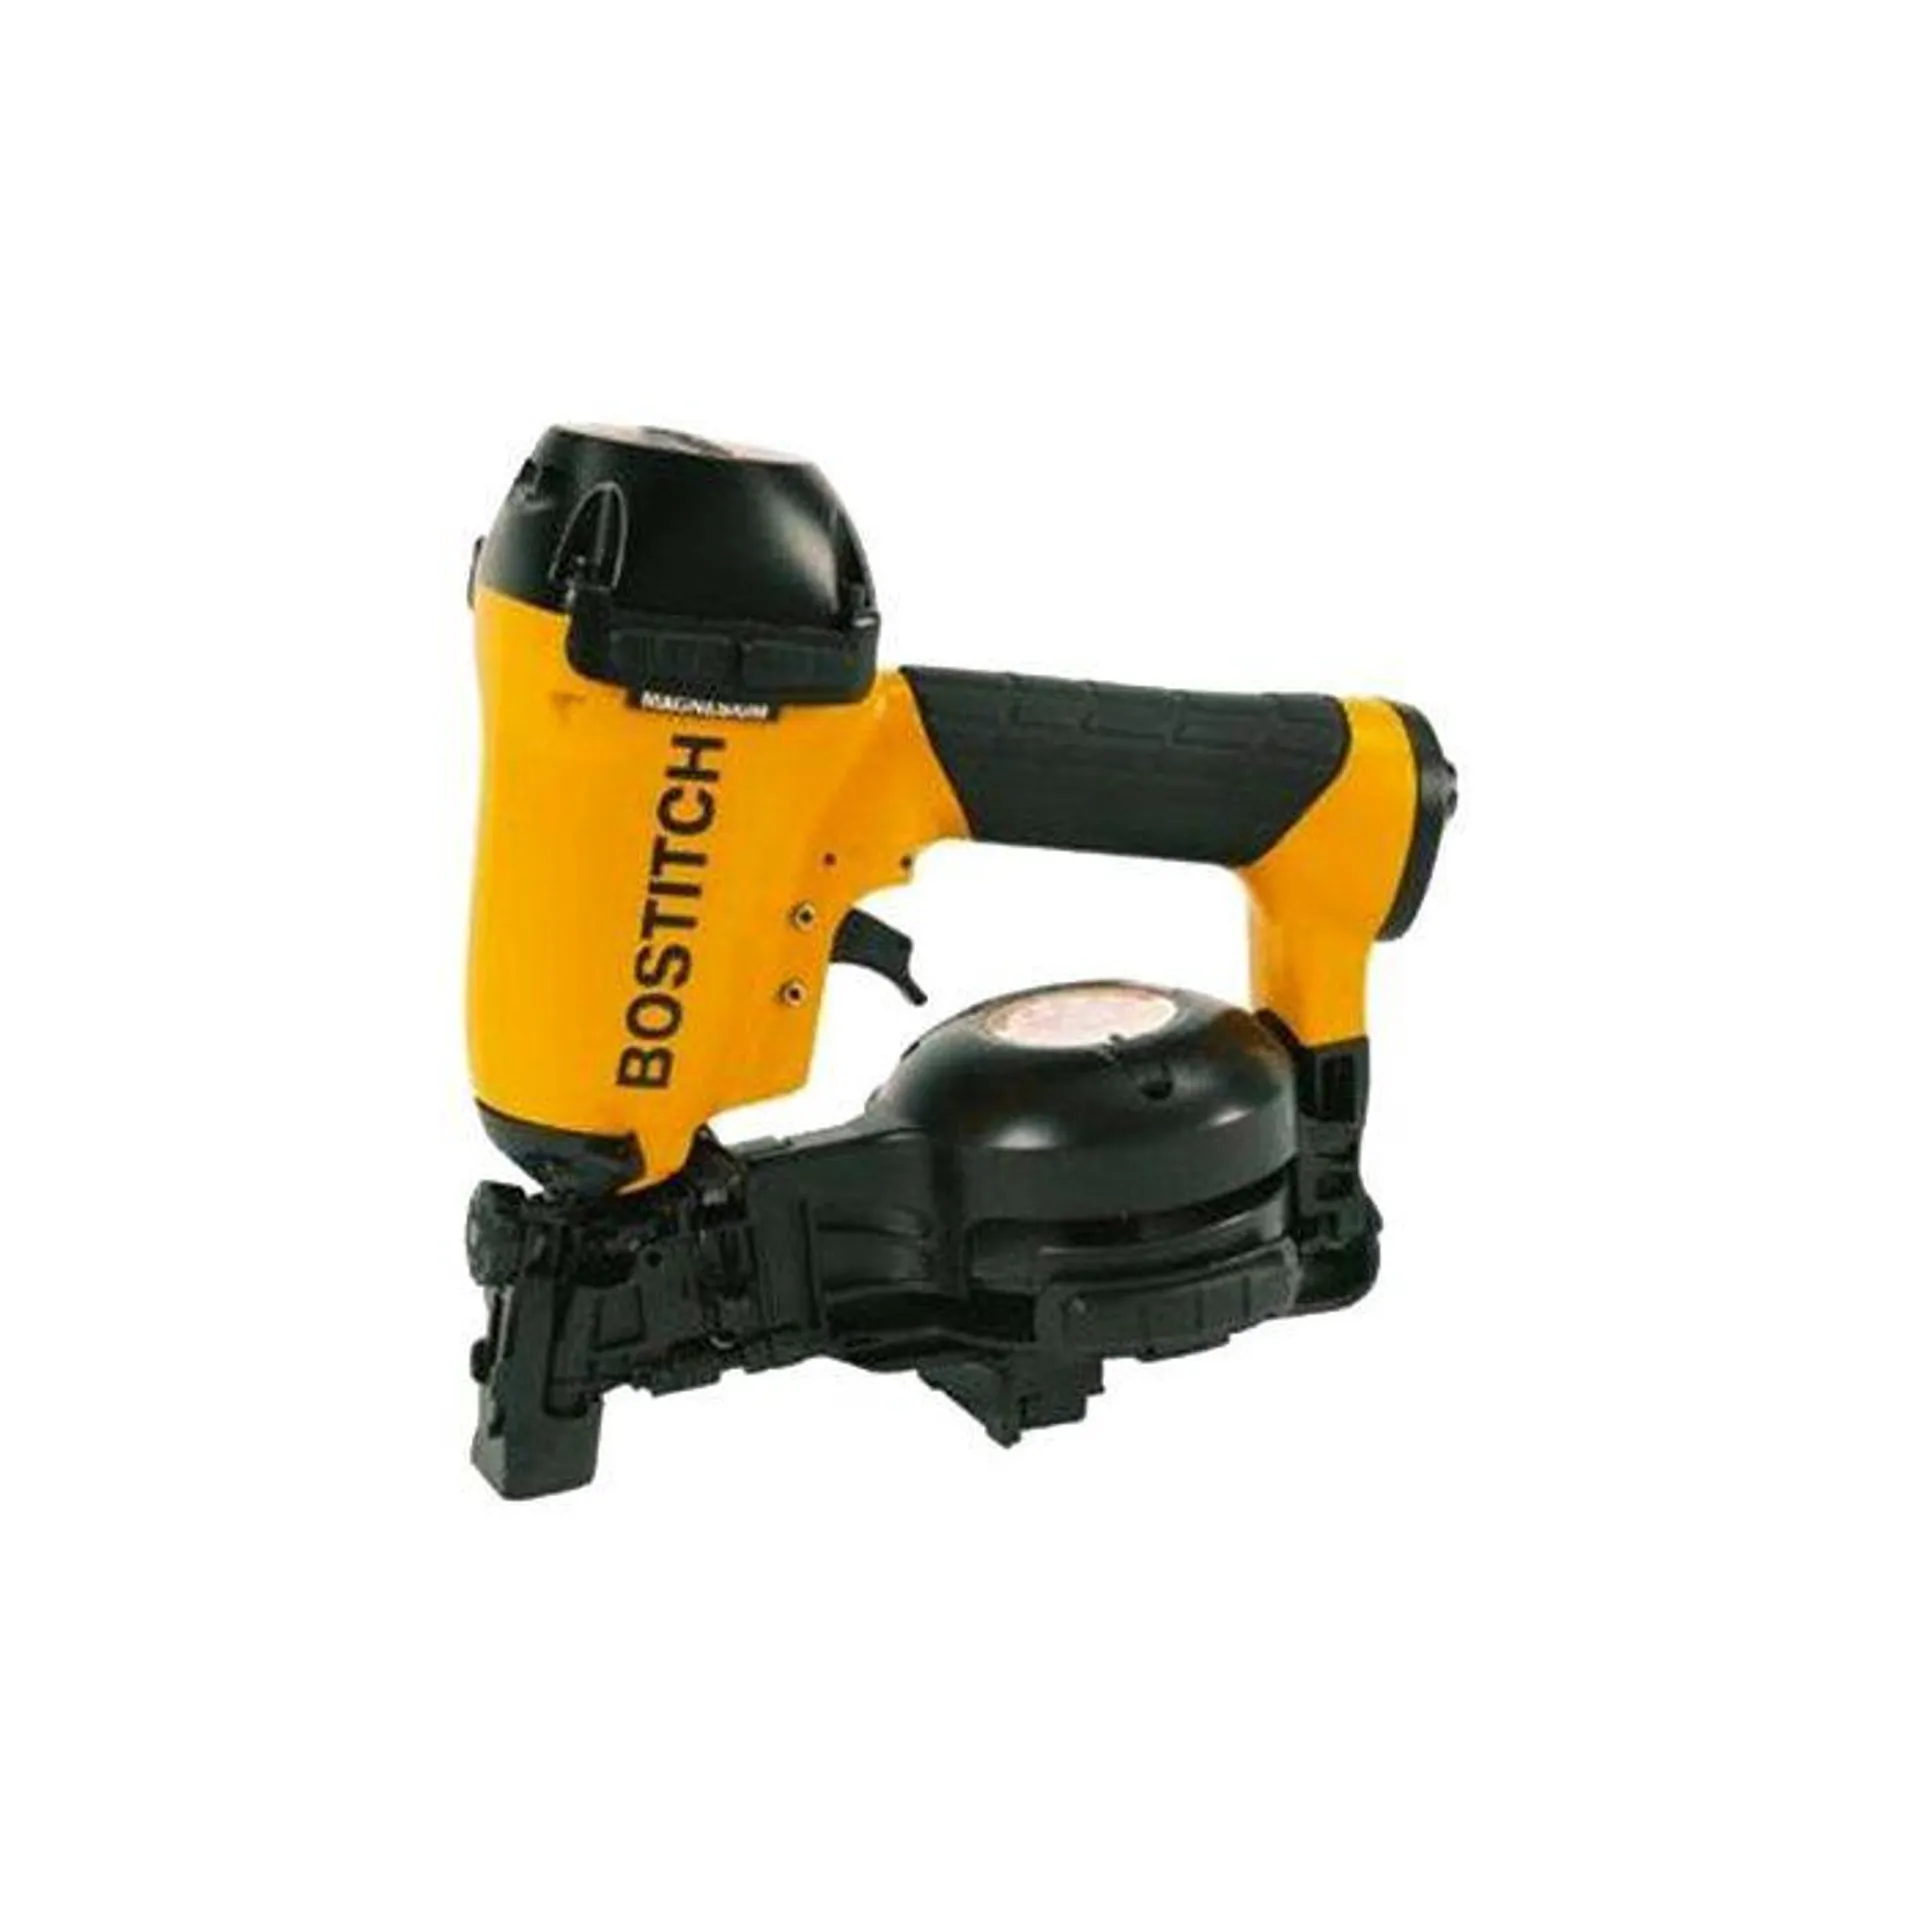 Bostitch 1-3/4" Roofing Nailer